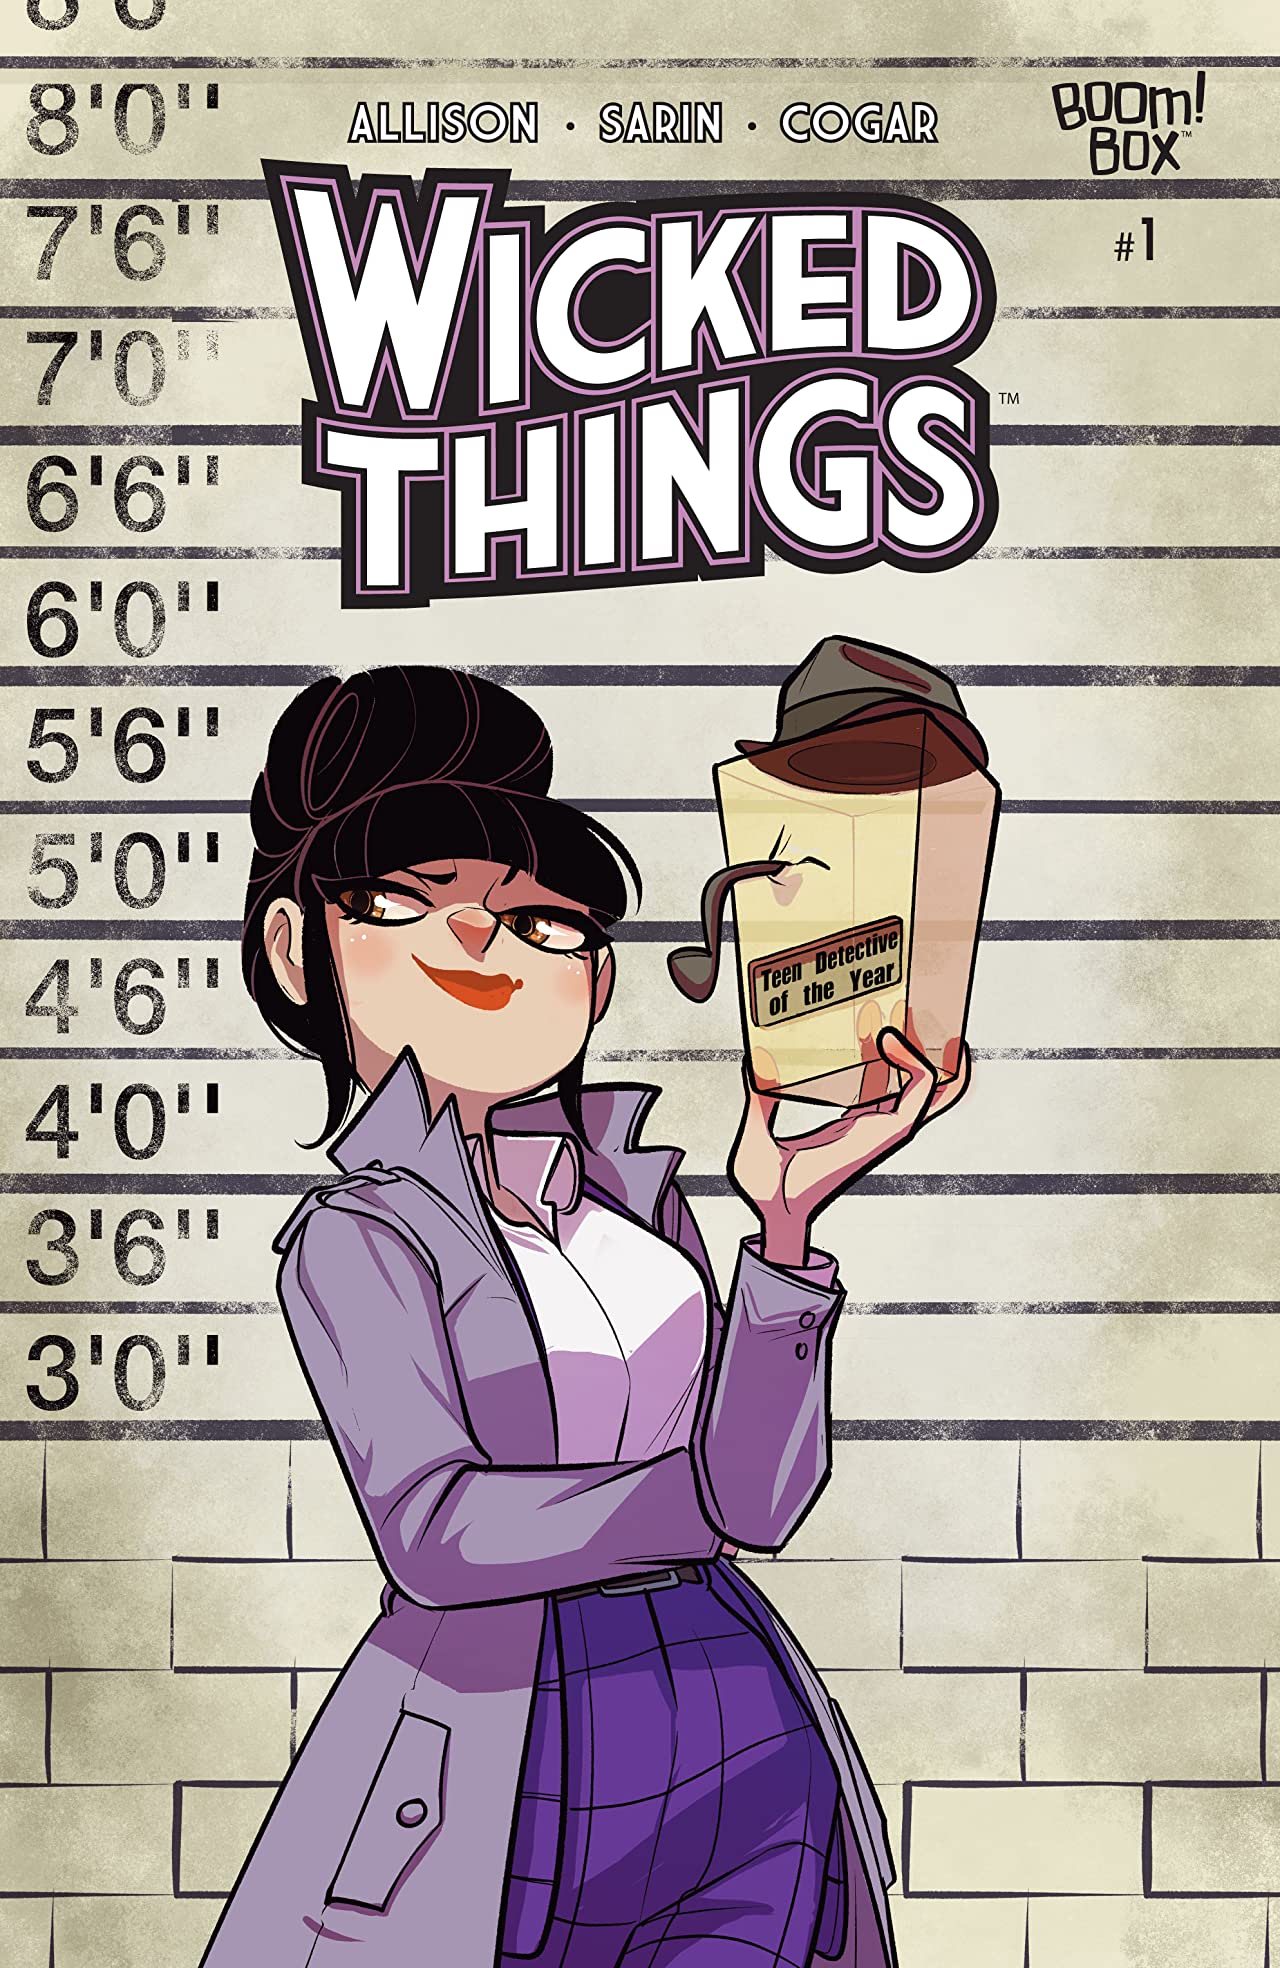 Wicked Things #1 Cover A Sarin